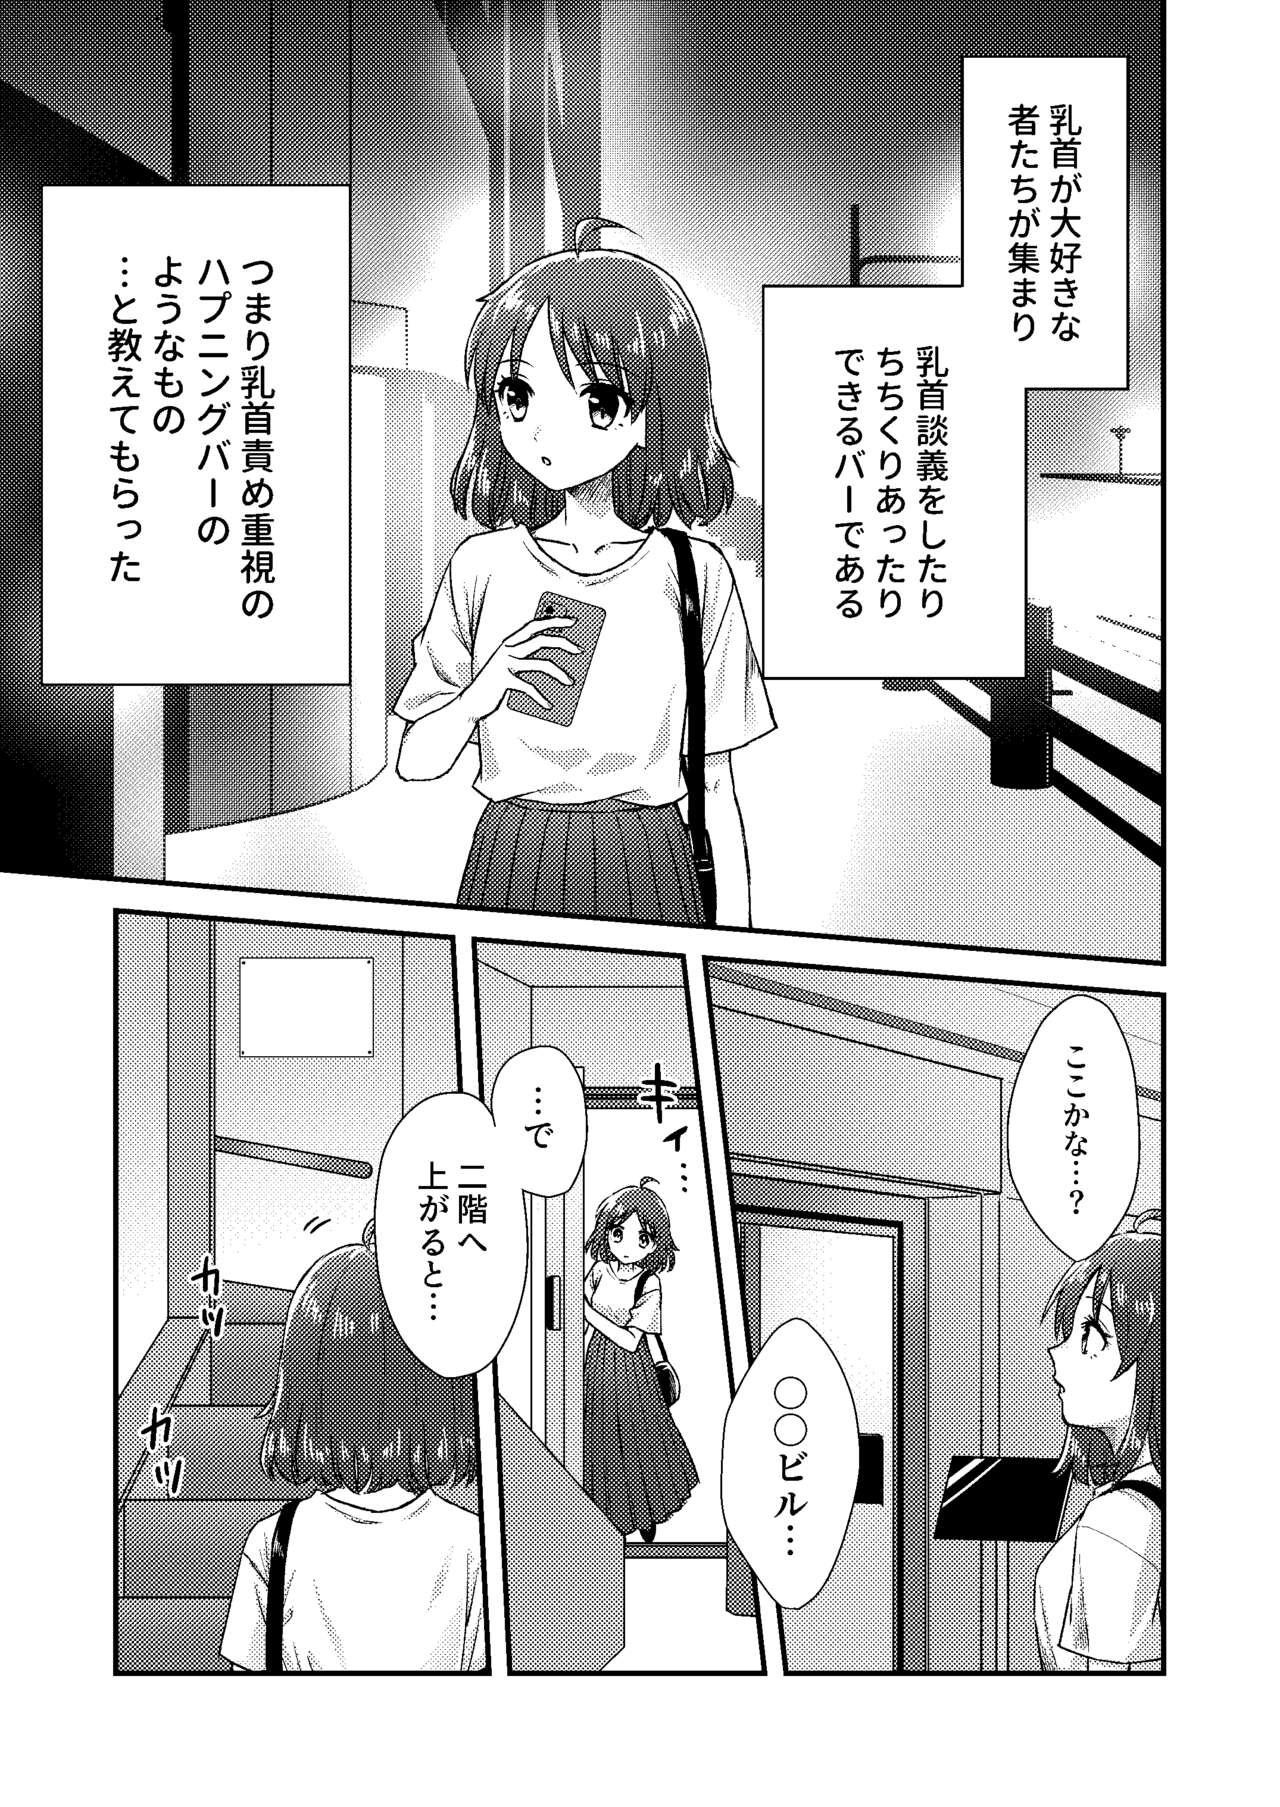 Relax にぷばー #1 つきみちゃんの場合 Footworship - Page 7